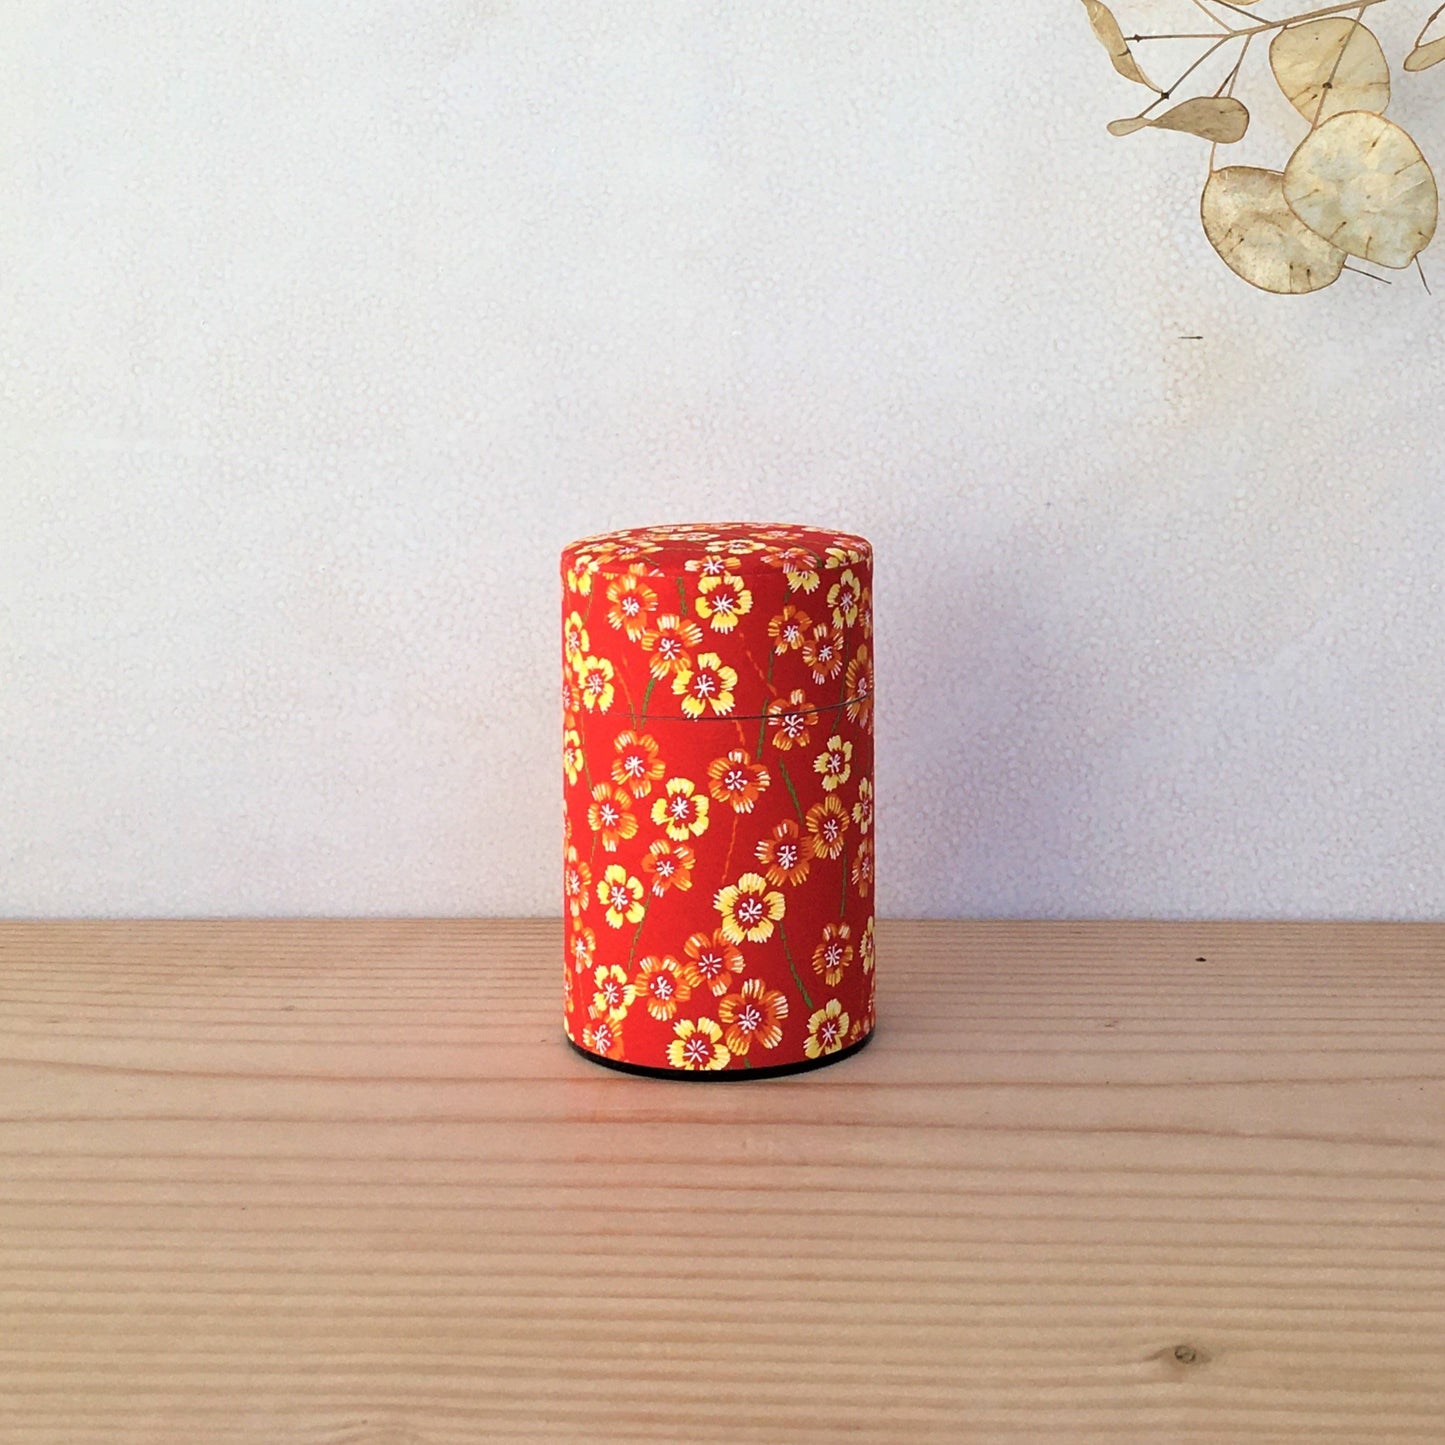 50g Red with Orange Blossoms, Washi Paper Canister